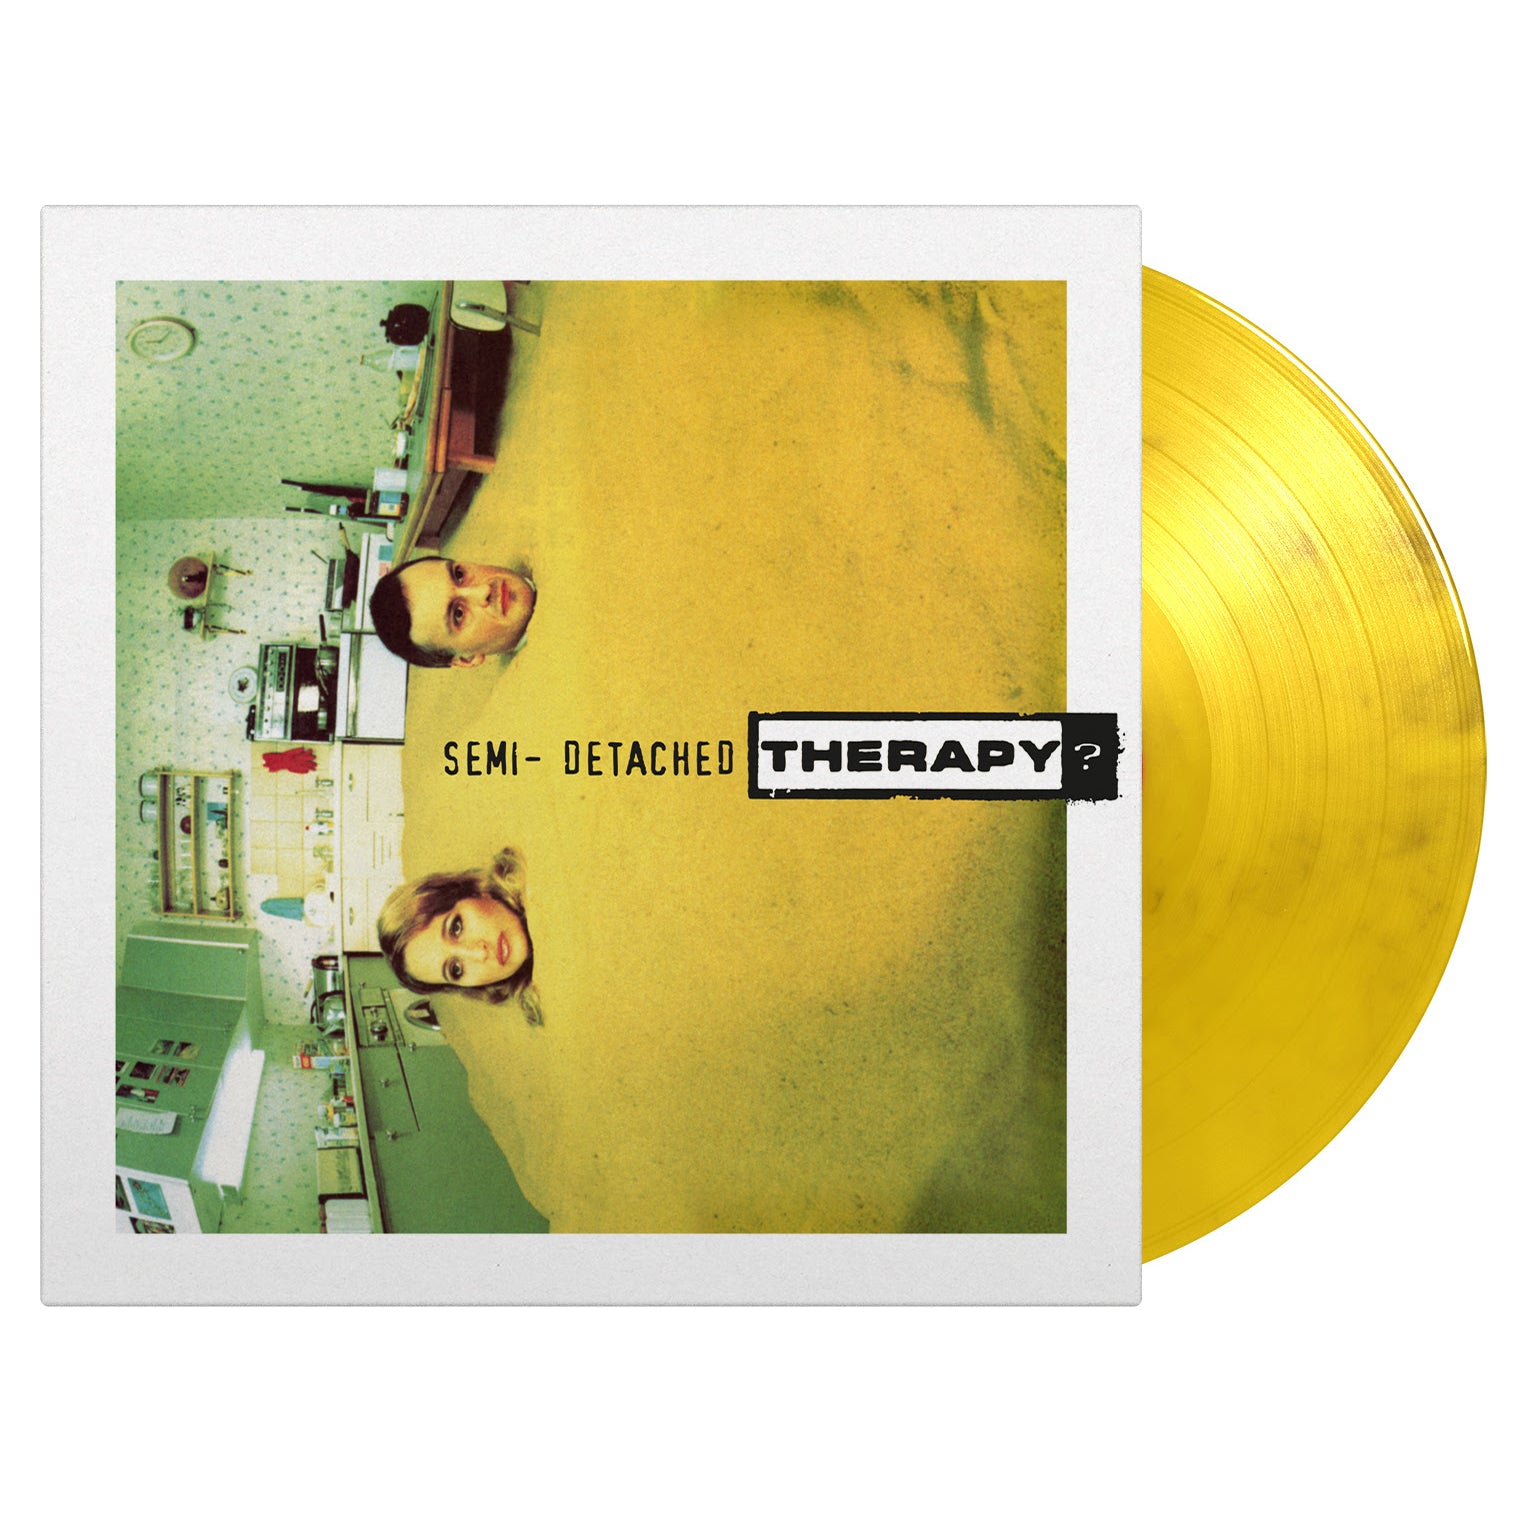 THERAPY? - Semi-Detatched - LP - Yellow & Black Marbled Vinyl